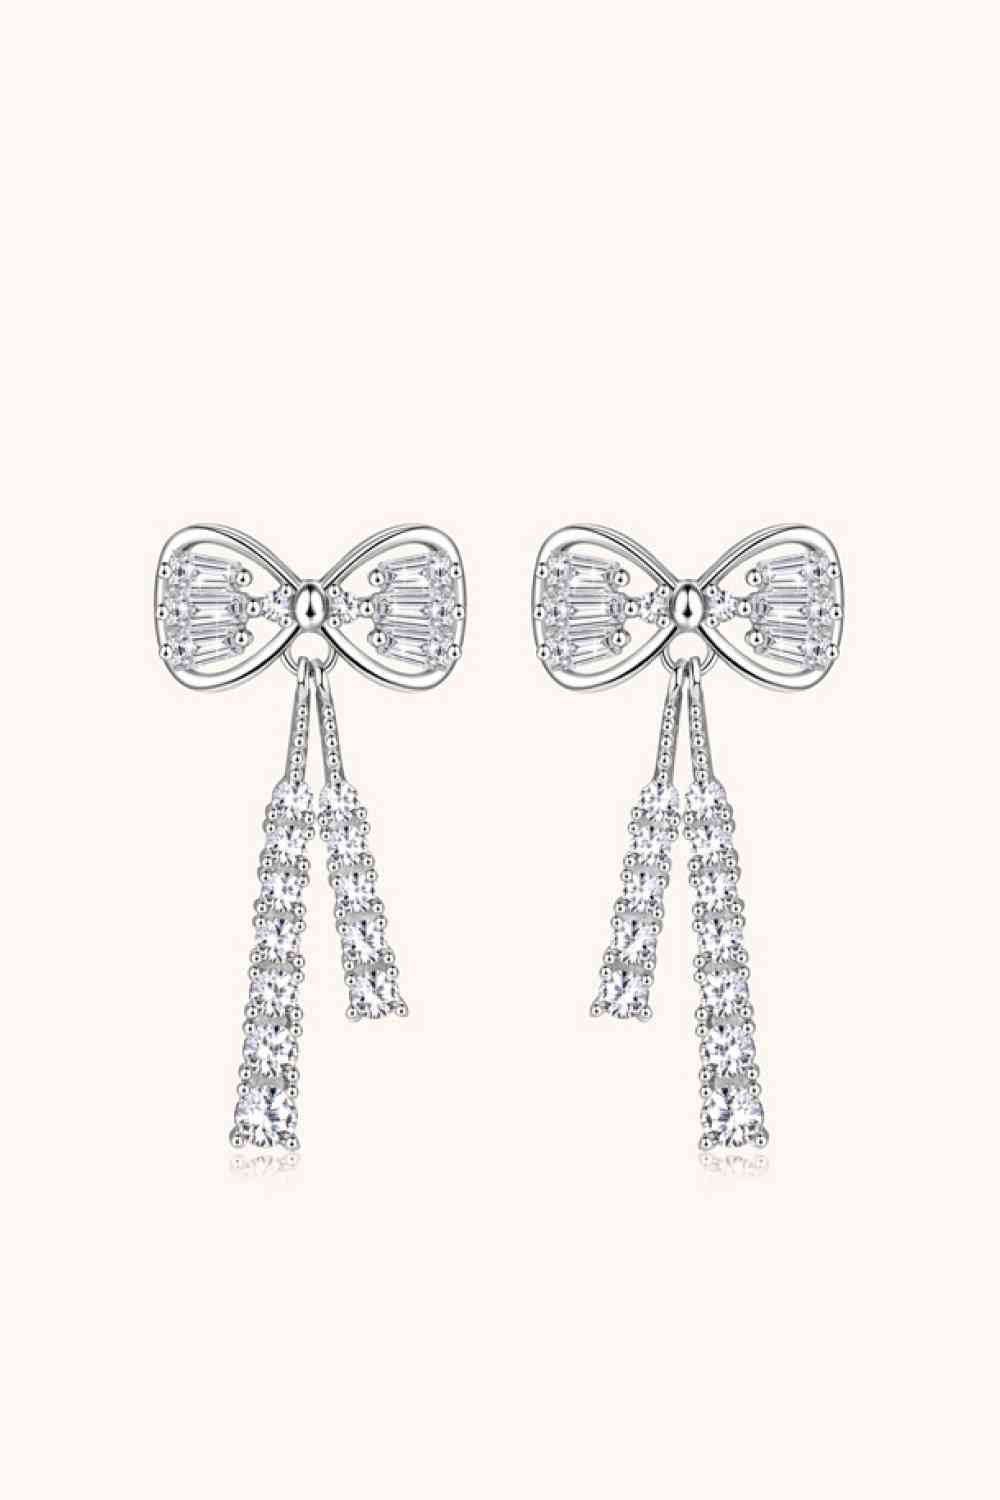 a pair of earrings with bows and diamonds